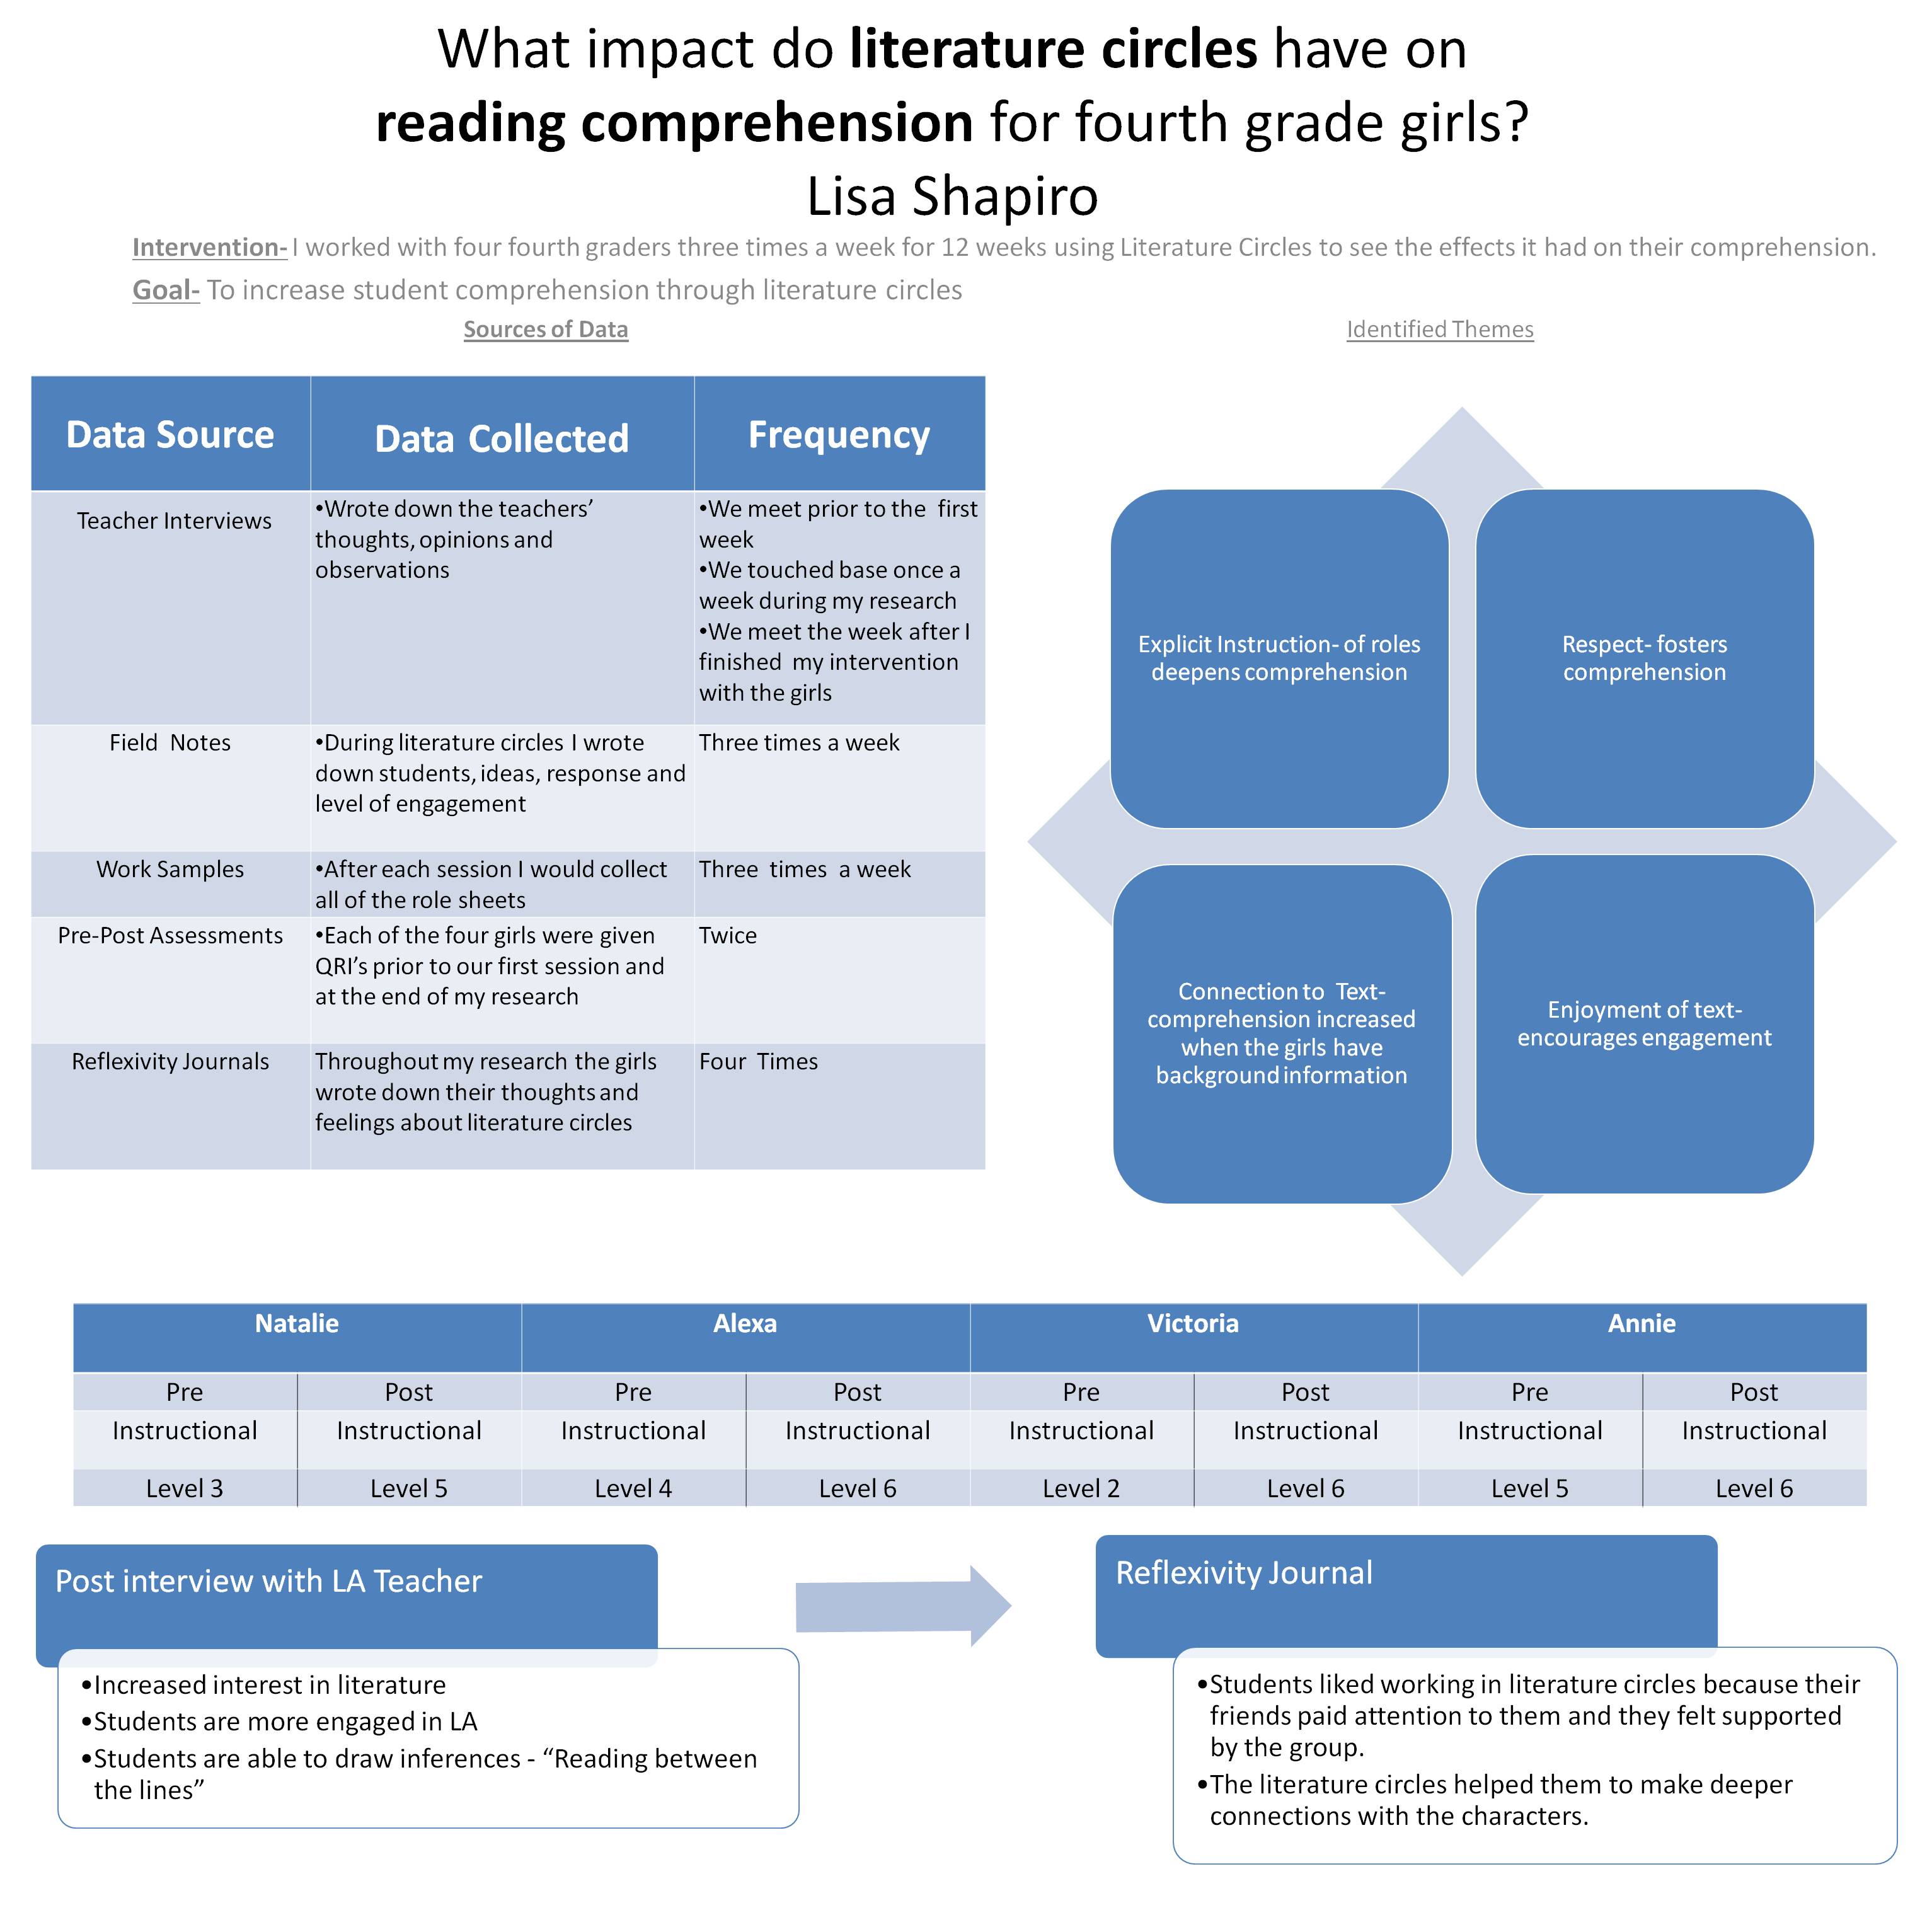 Poster image: What Impact do Literature Circles have on Comprehension for Fourth Grade Girls?